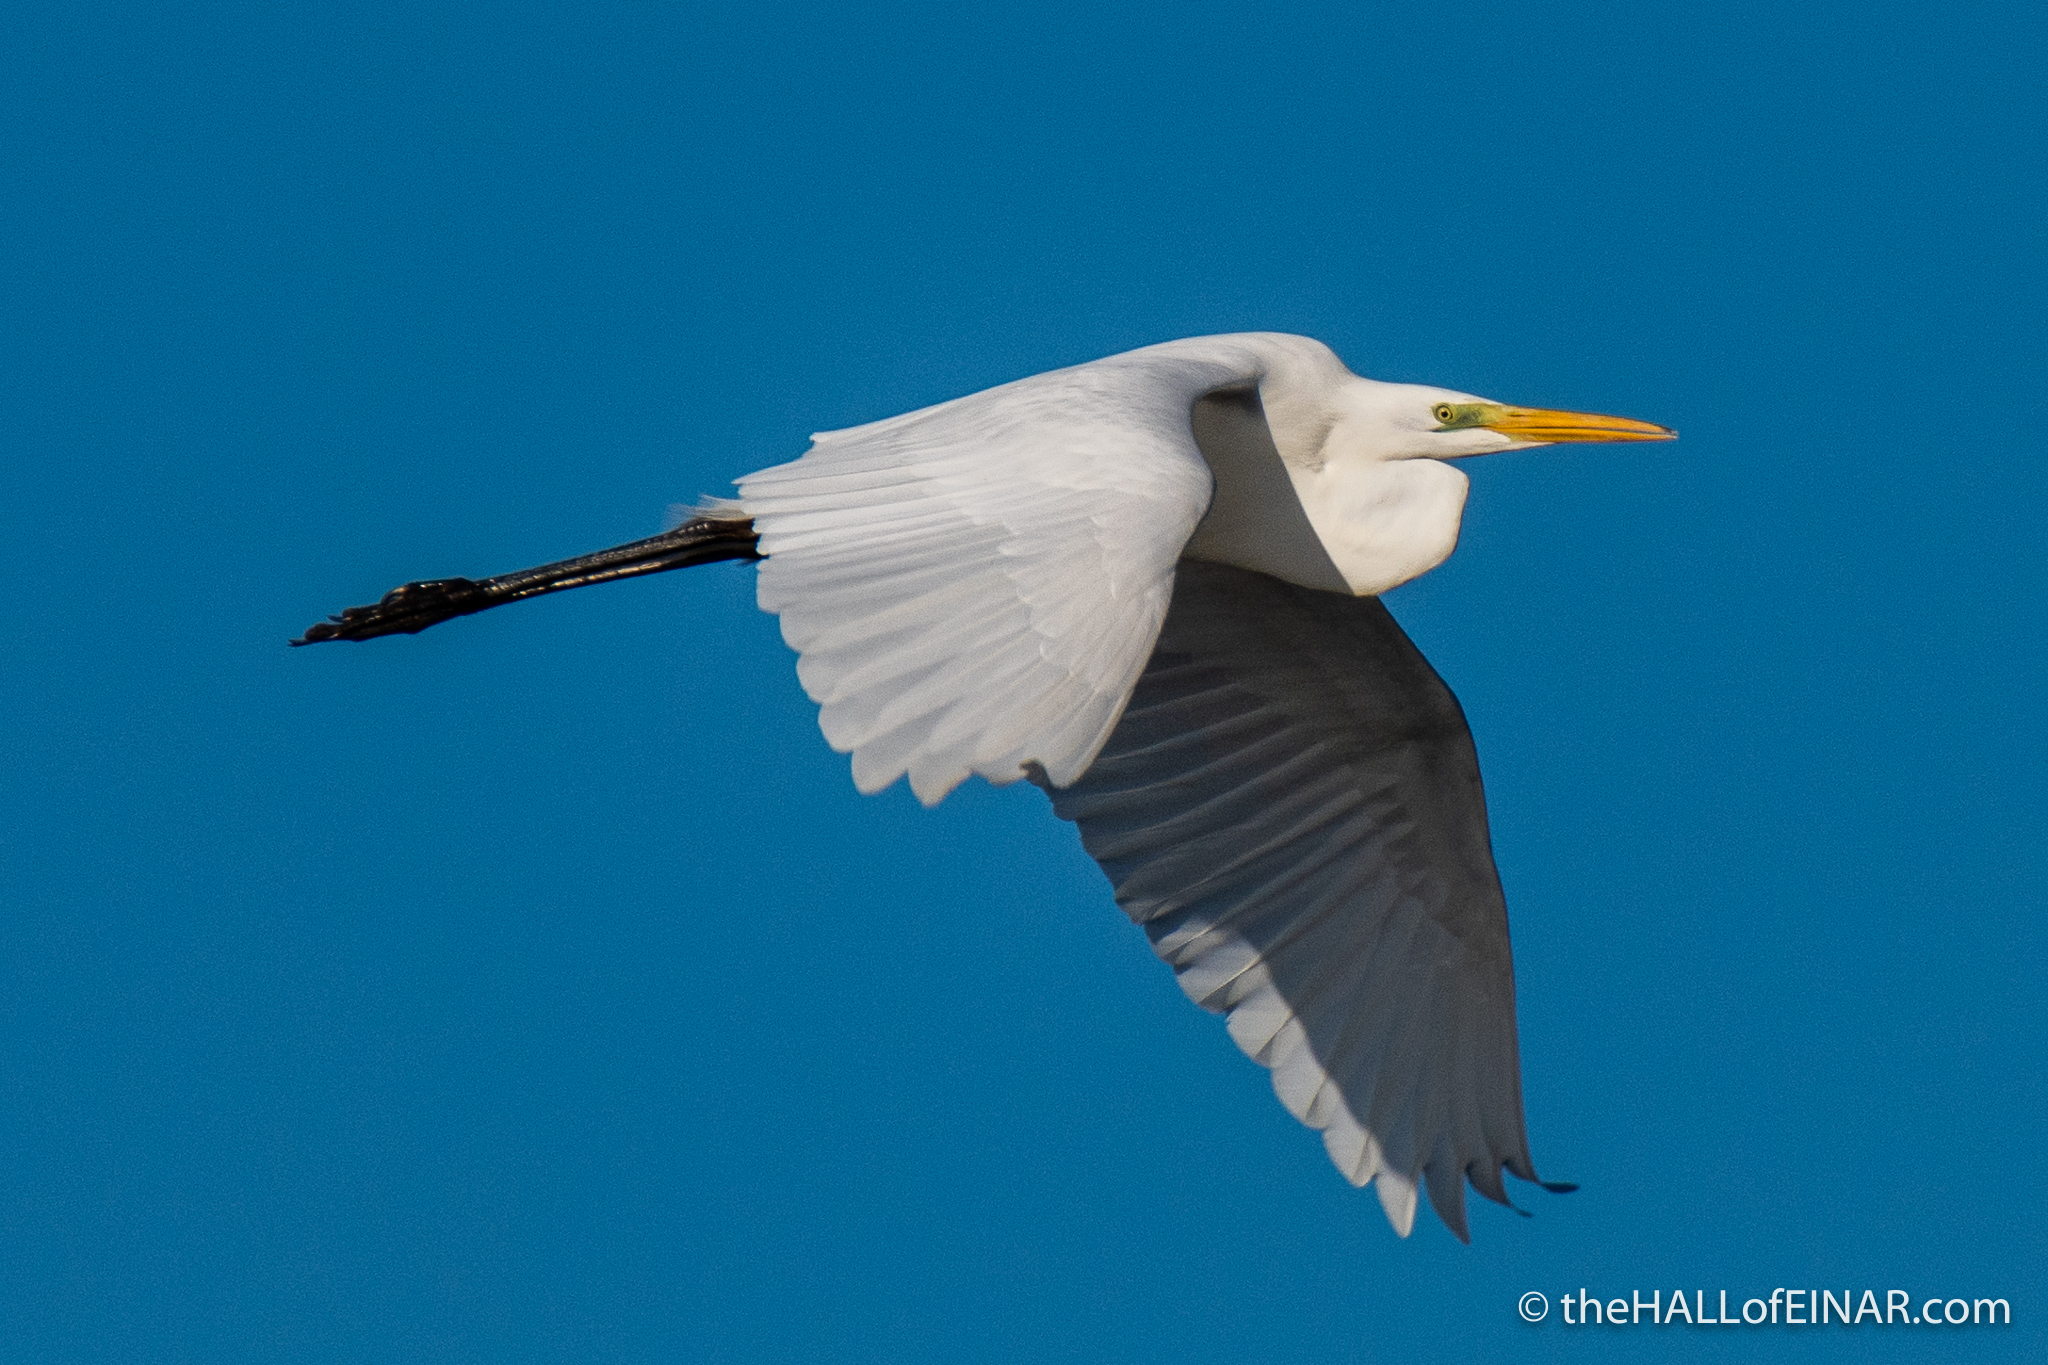 Great White Egret - Orbetello - The Hall of Einar - photograph (c) David Bailey (not the)